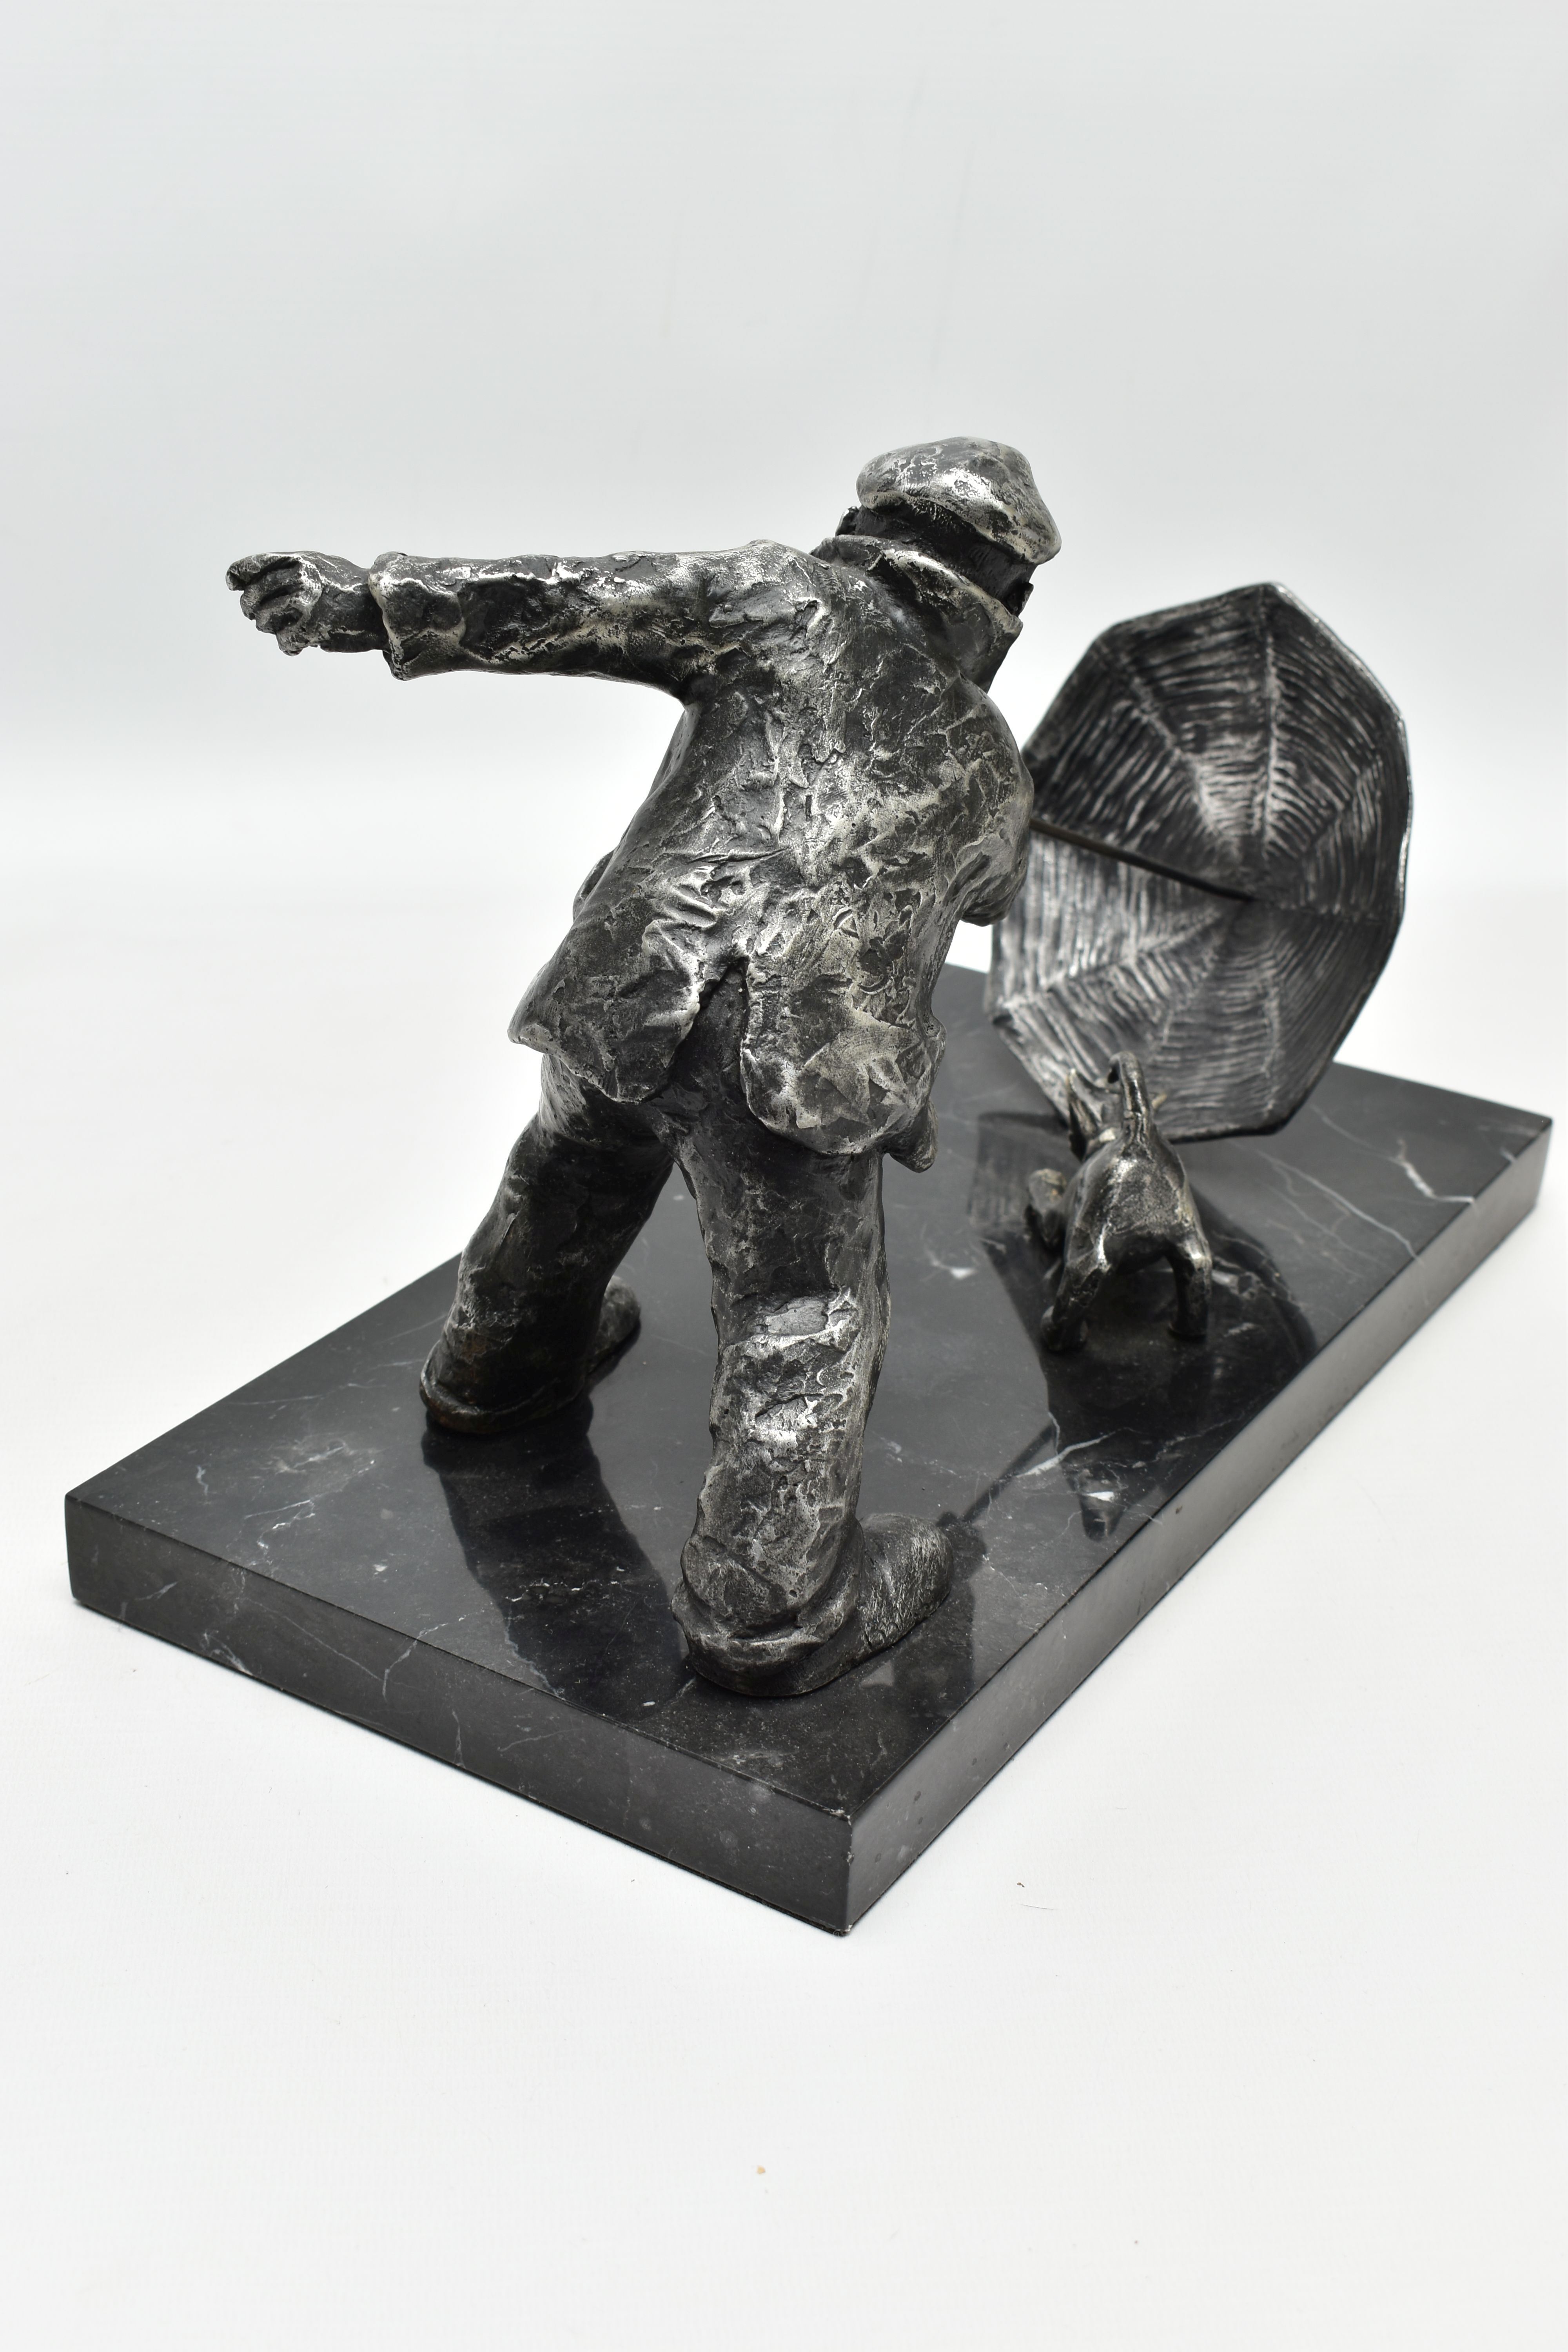 GEORGE SOMERVILLE (SCOTTISH 1947) 'BLOWN AWAY', a limited edition aluminium sculpture depicting a - Image 7 of 10